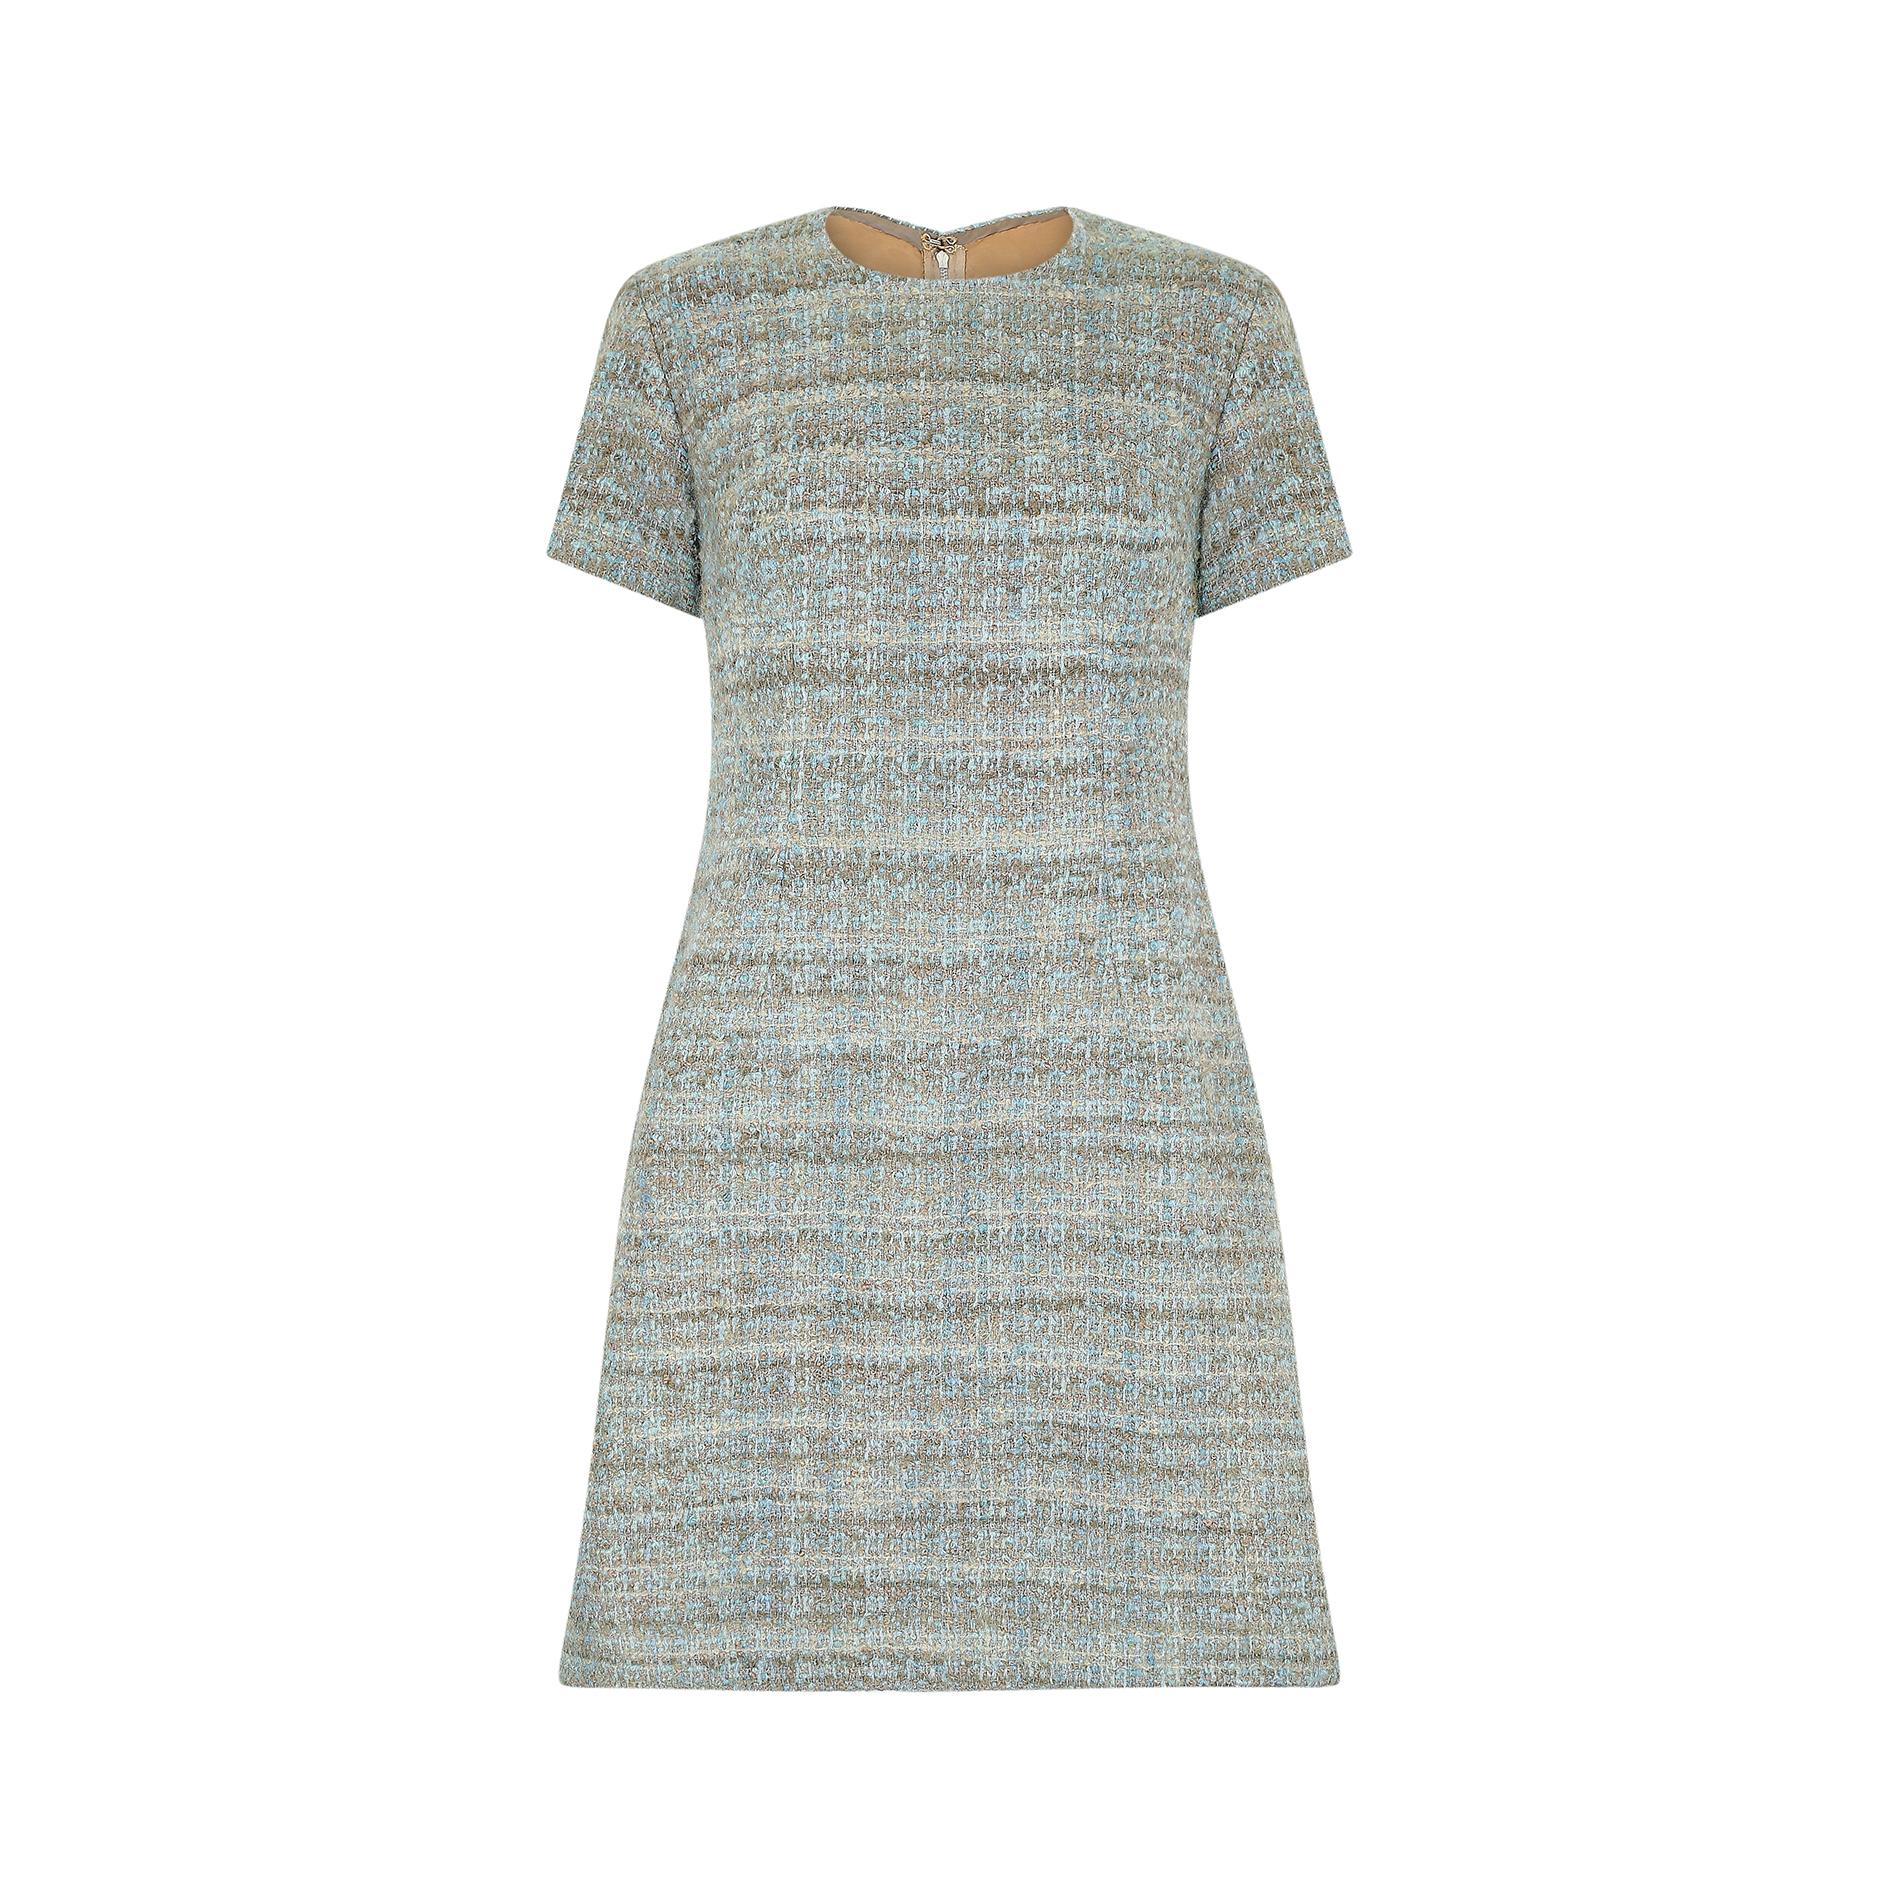 This French couture 1960s wool mod dress is cut in an era defining A-line silhouette, with short sleeves, a nipped in waist and slightly fuller skirt. It has a rounded neckline and a rear original zip closure, complete with hook and eye fastening.